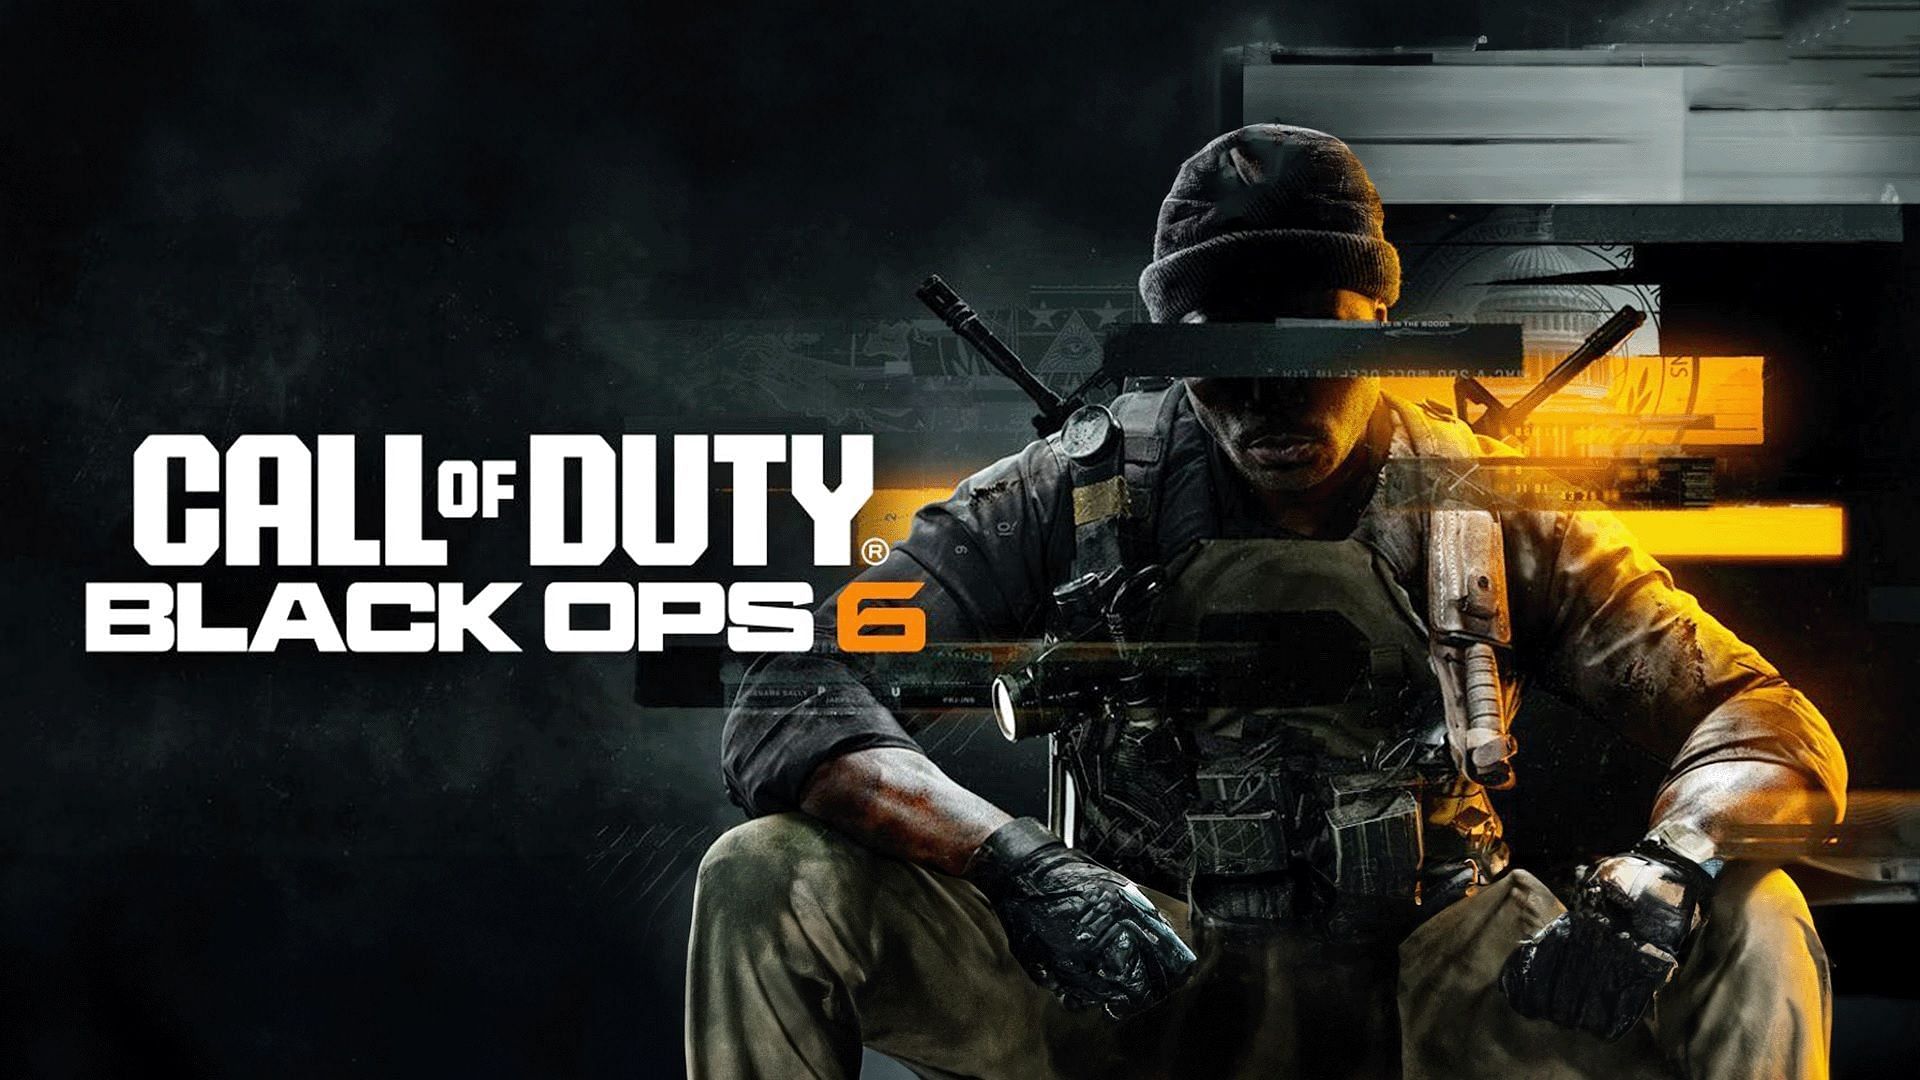 Call of Duty Black Ops 6 will be the best game in Treyarch